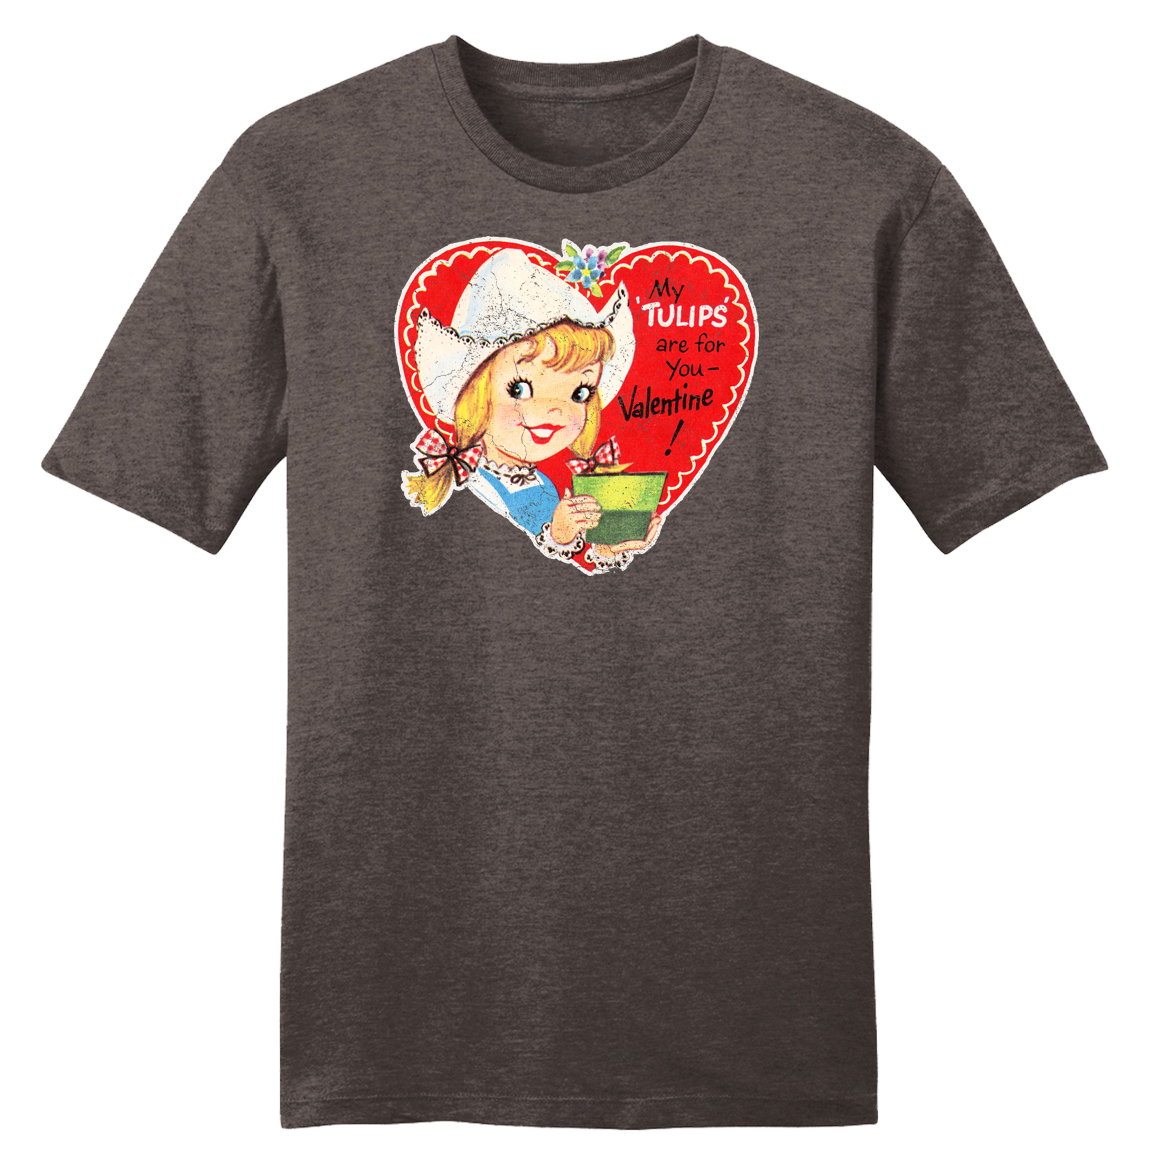 My Tulips Are for You - Vintage Valentine's Day Tee